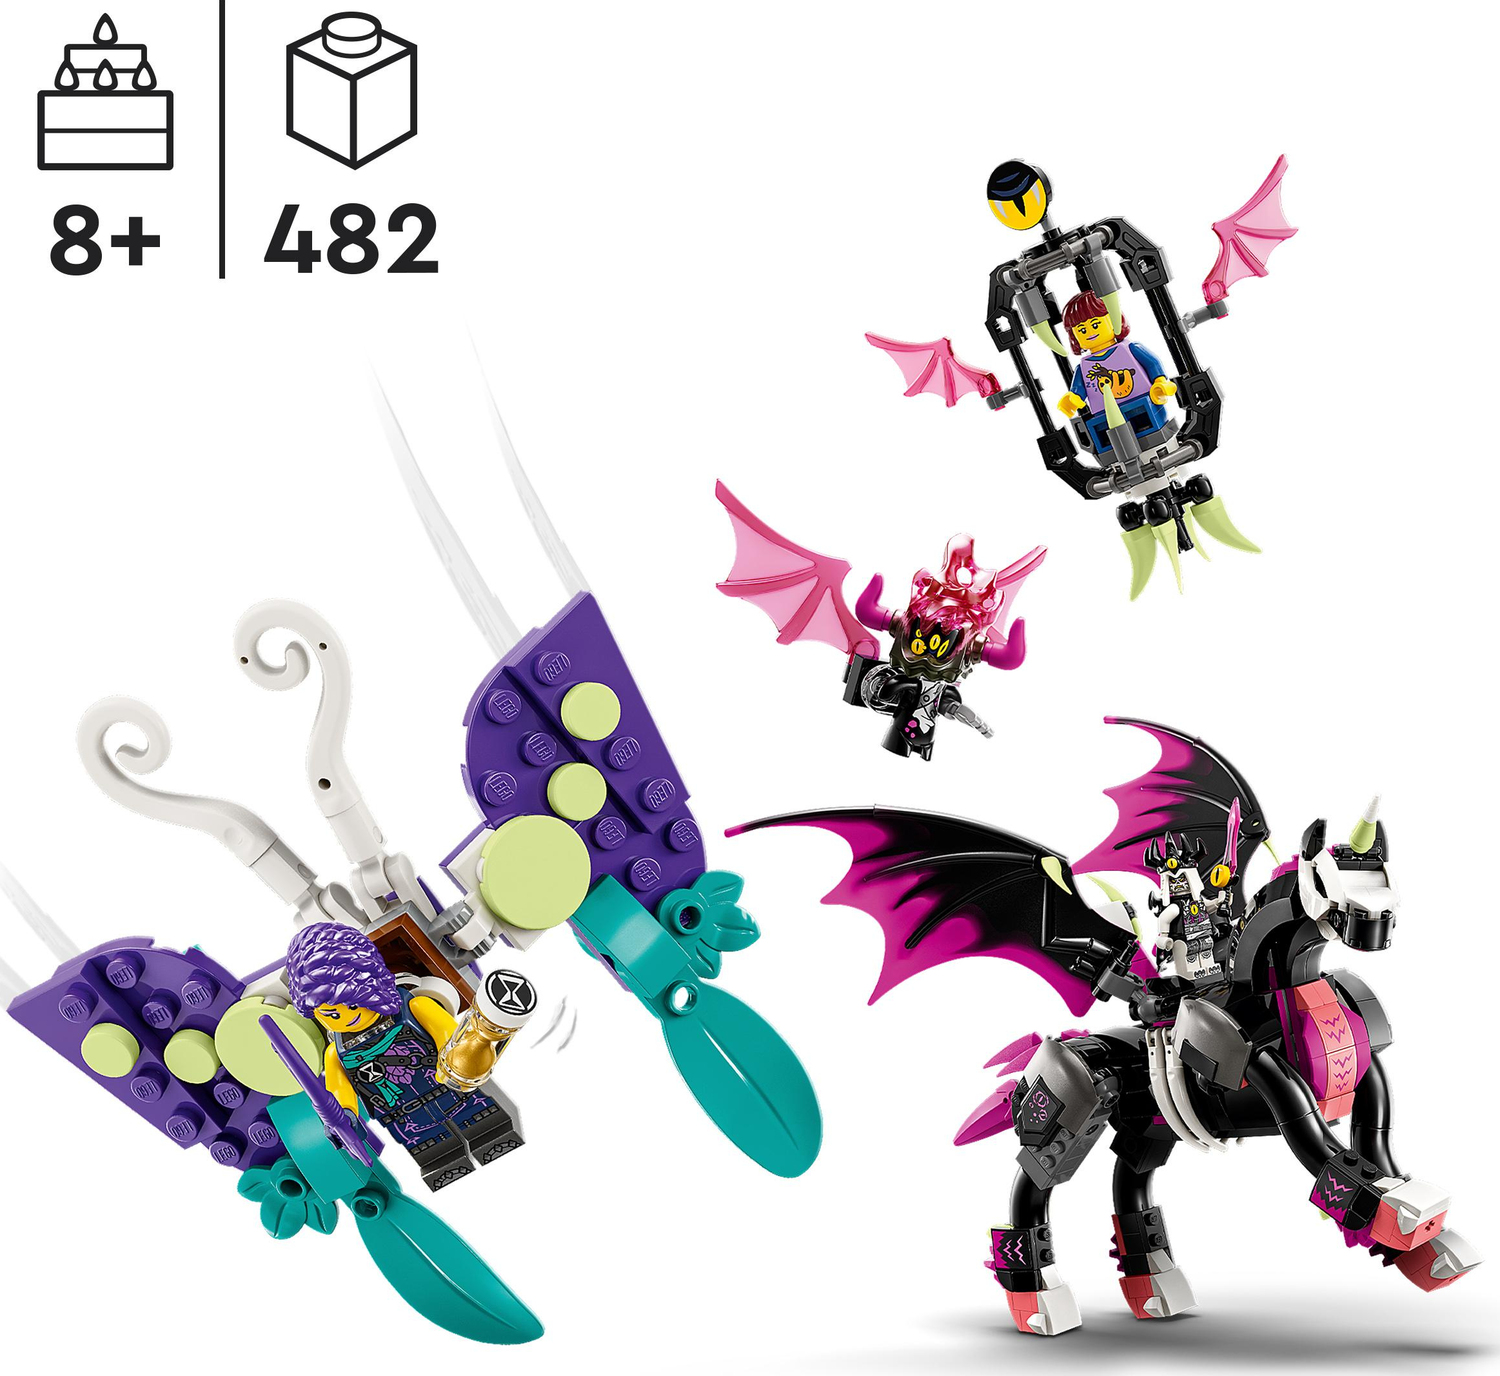 LEGO DREAMZzz Pegasus Flying Horse Toy 2 in 1